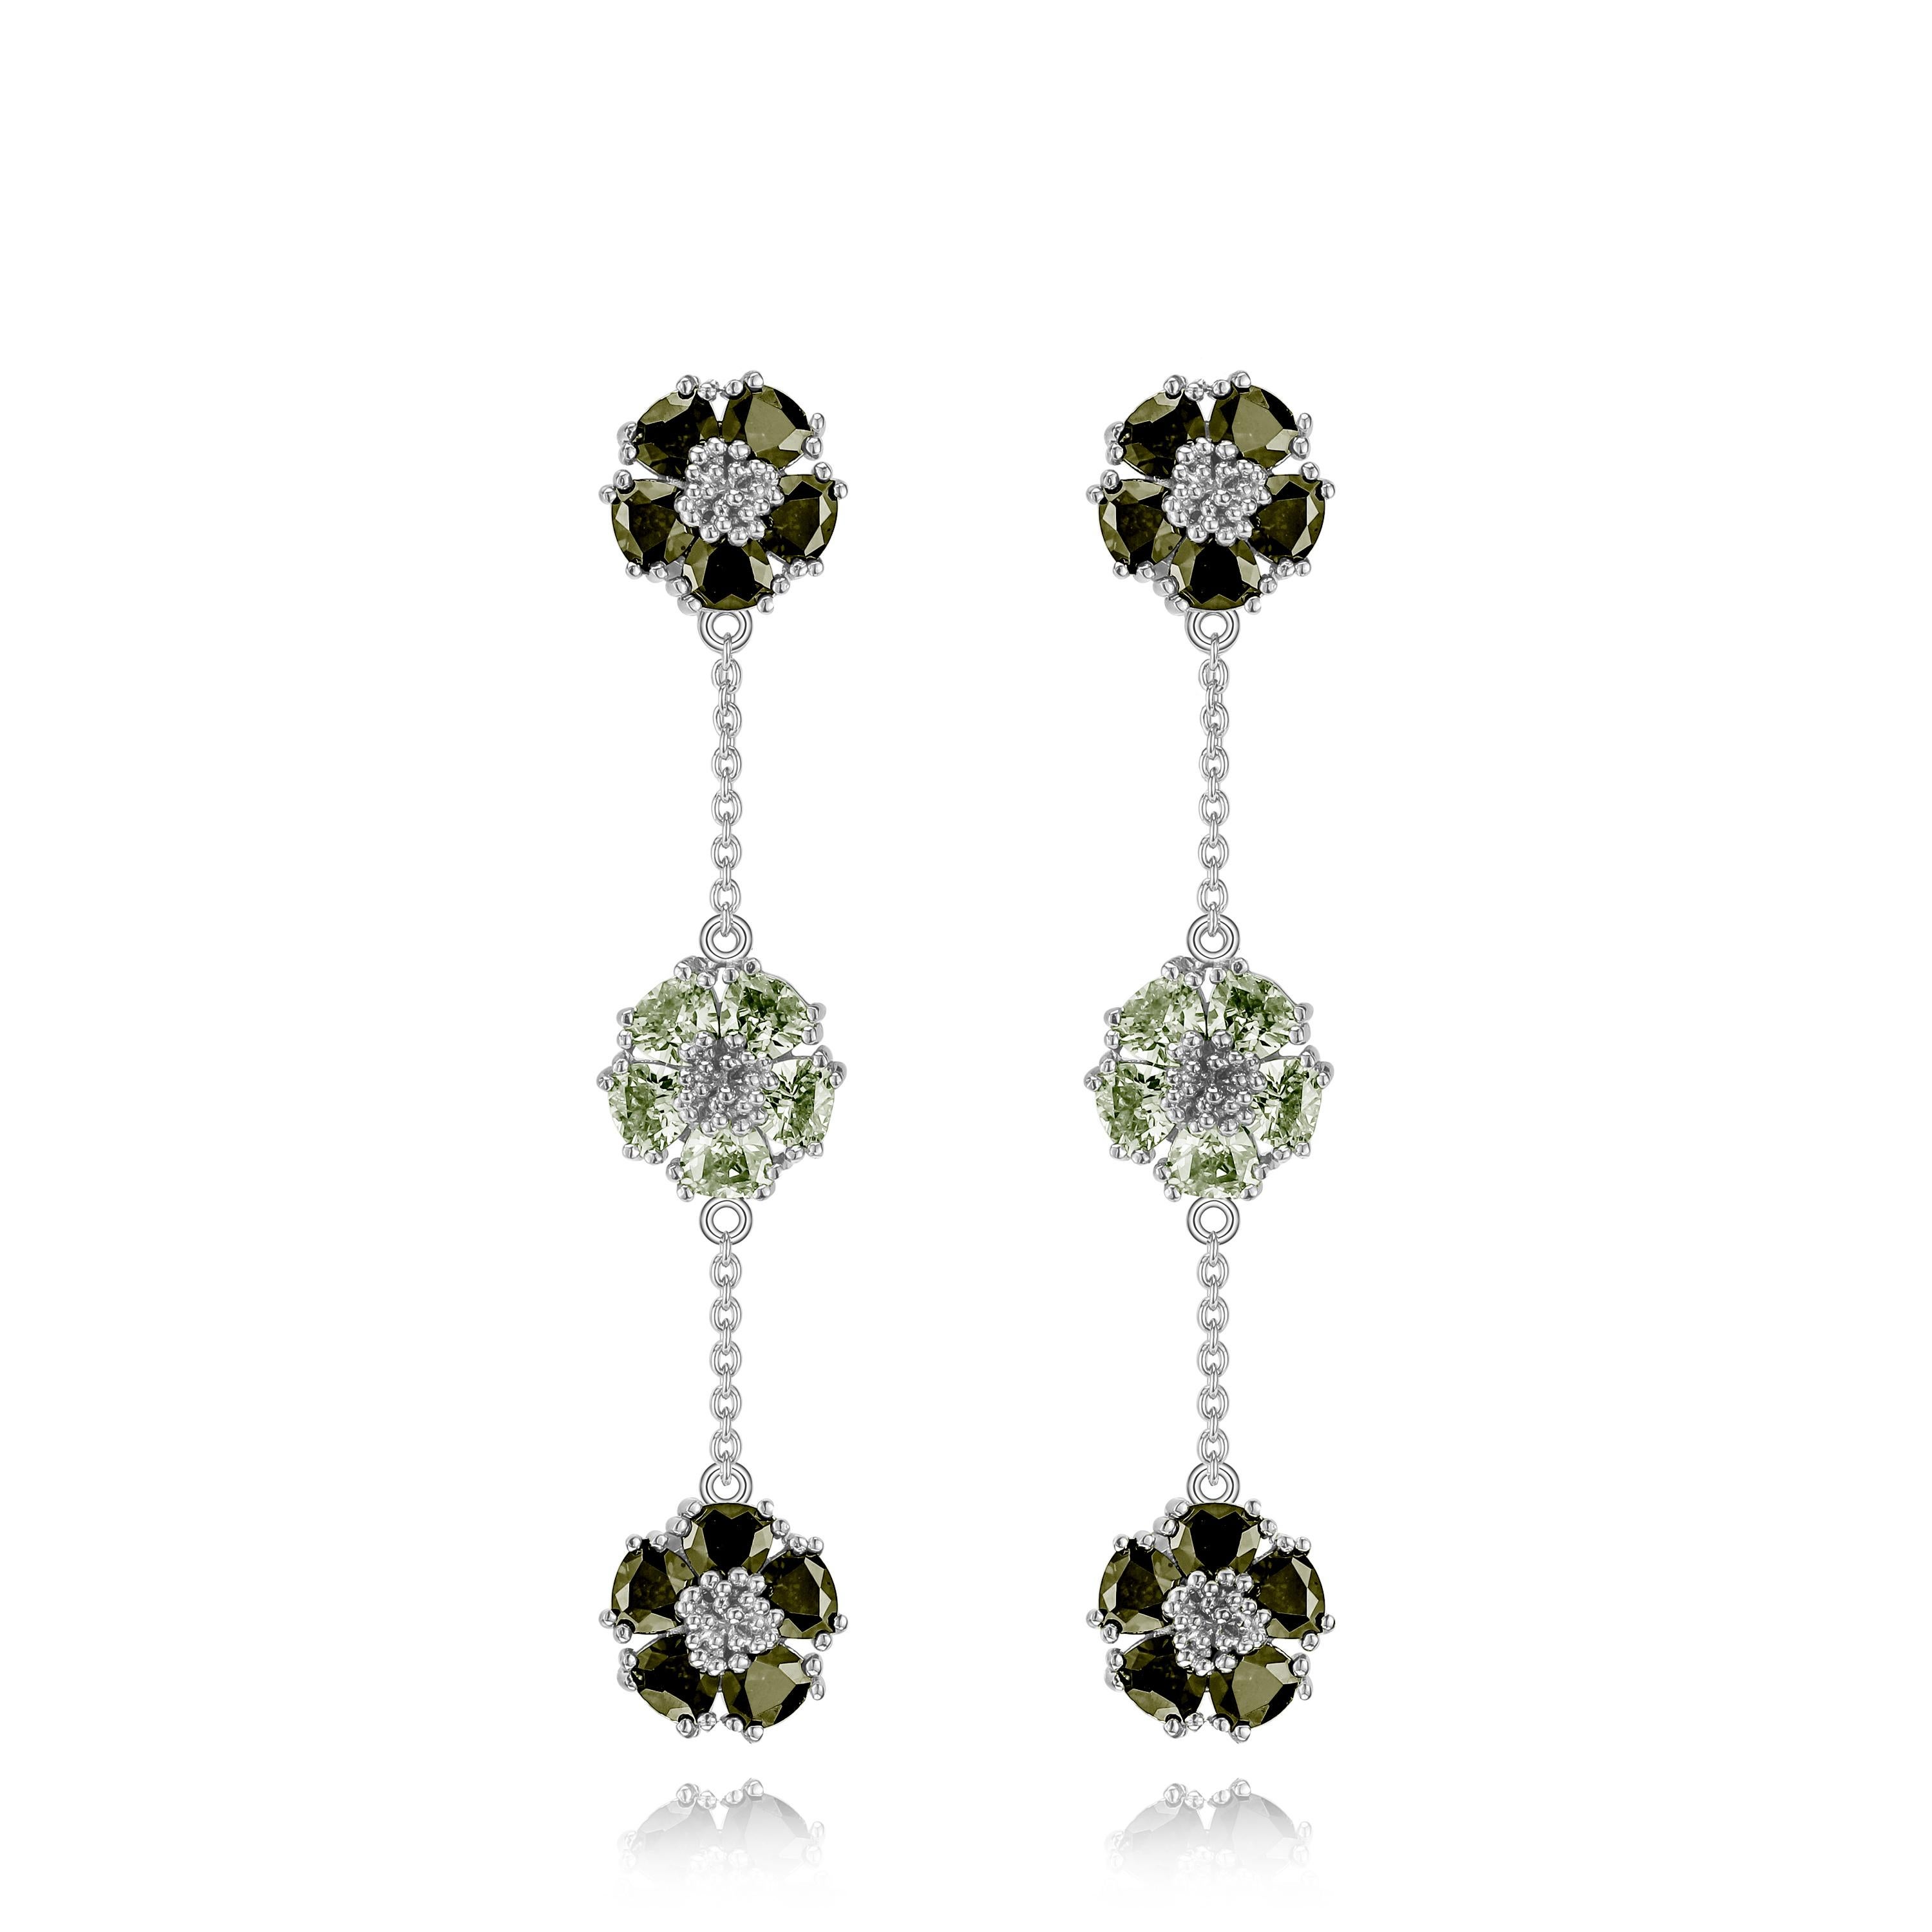 Designed in NYC

.925 Sterling Silver 3 x 10 mm Black Spinel and White Topaz Blossom Gentile Alternating Chandelier Earrings. No matter the season, allow natural beauty to surround you wherever you go. Blossom gentile alternating chandelier